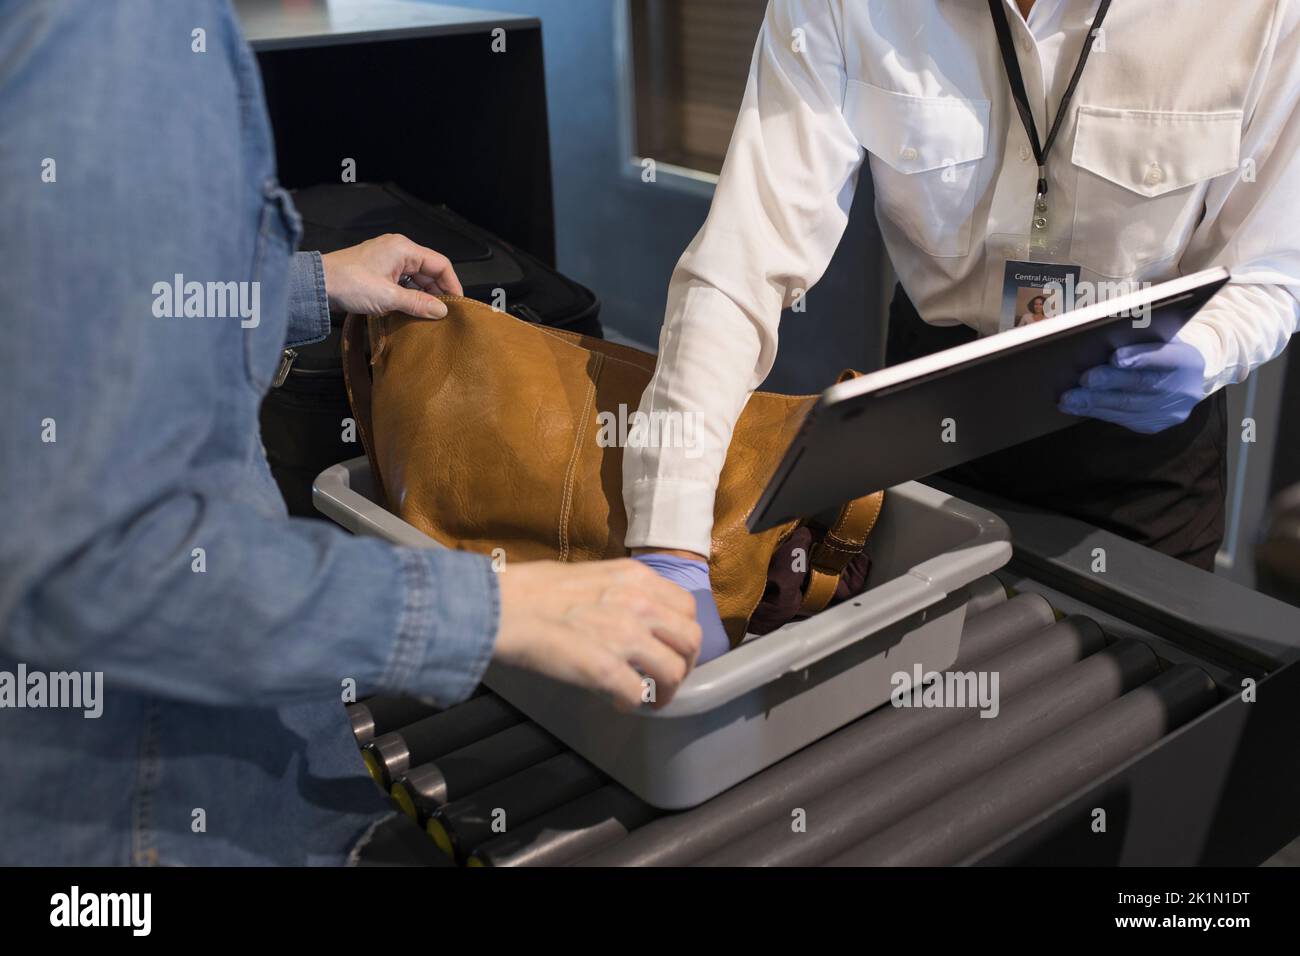 Airport security agent helping woman remove laptop at inspection Stock Photo